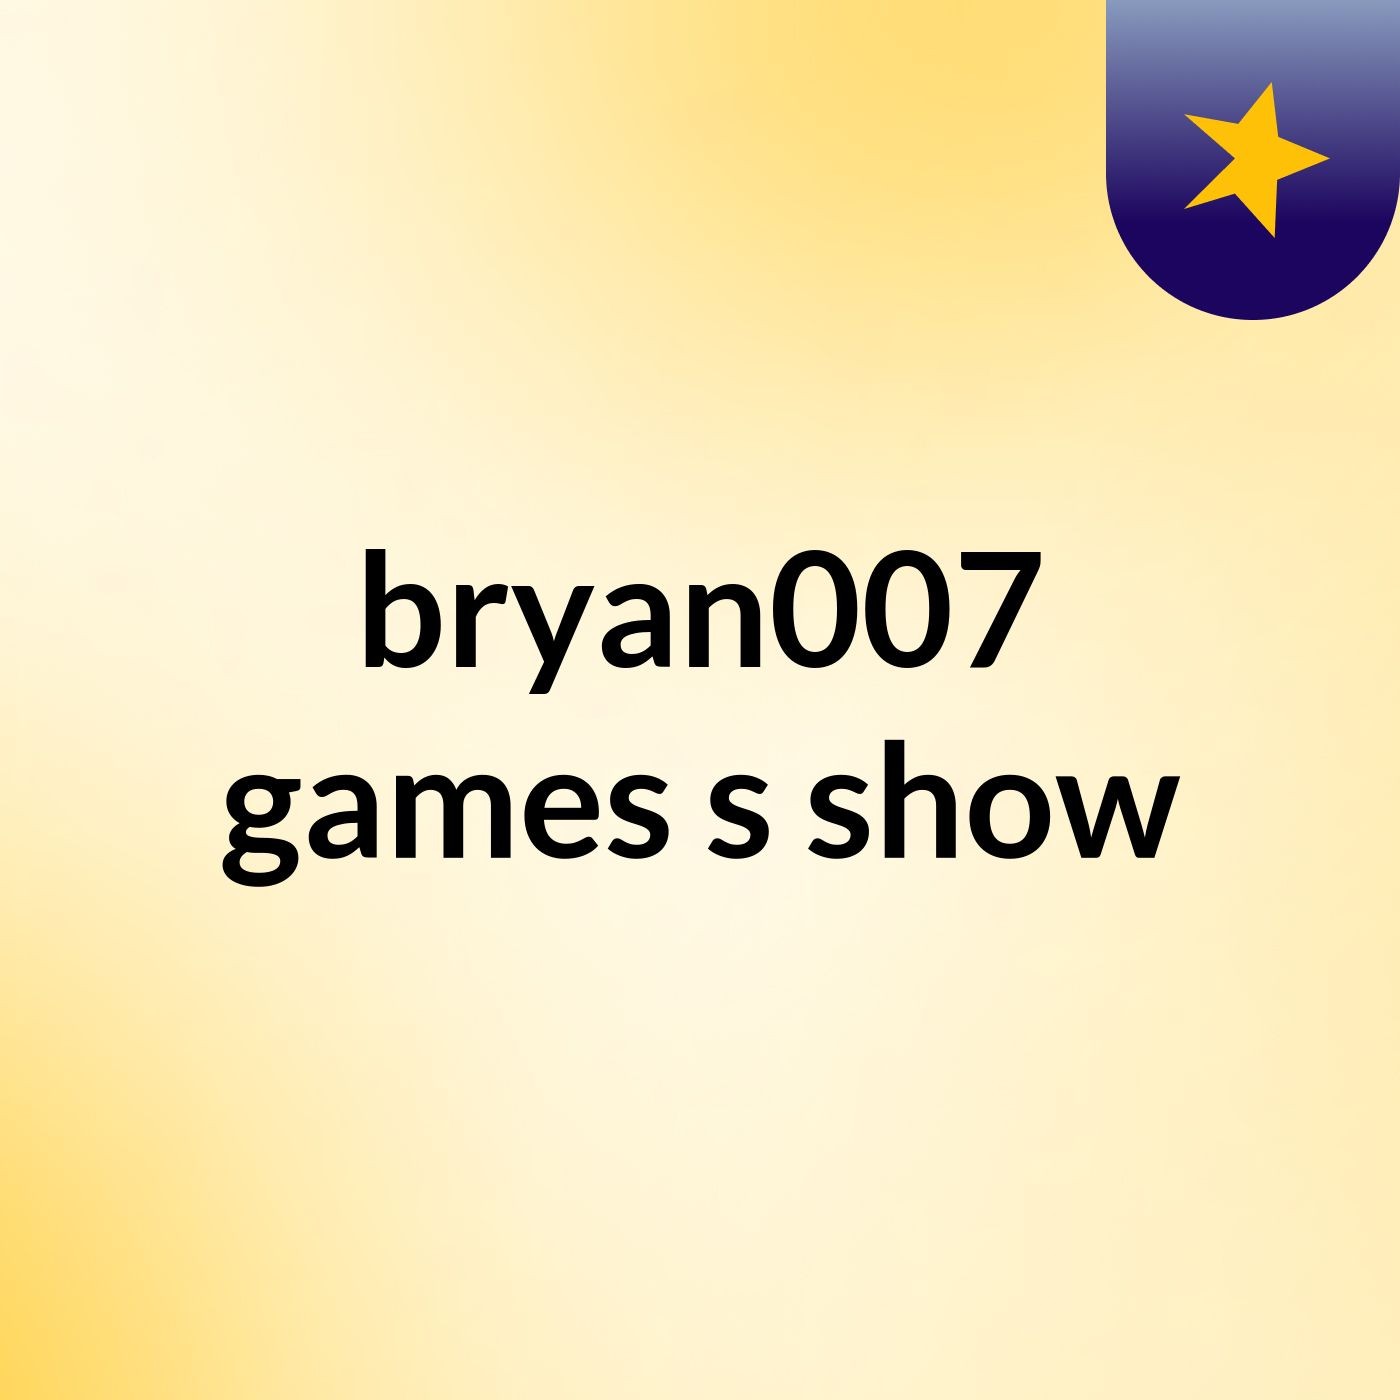 bryan007 games's show